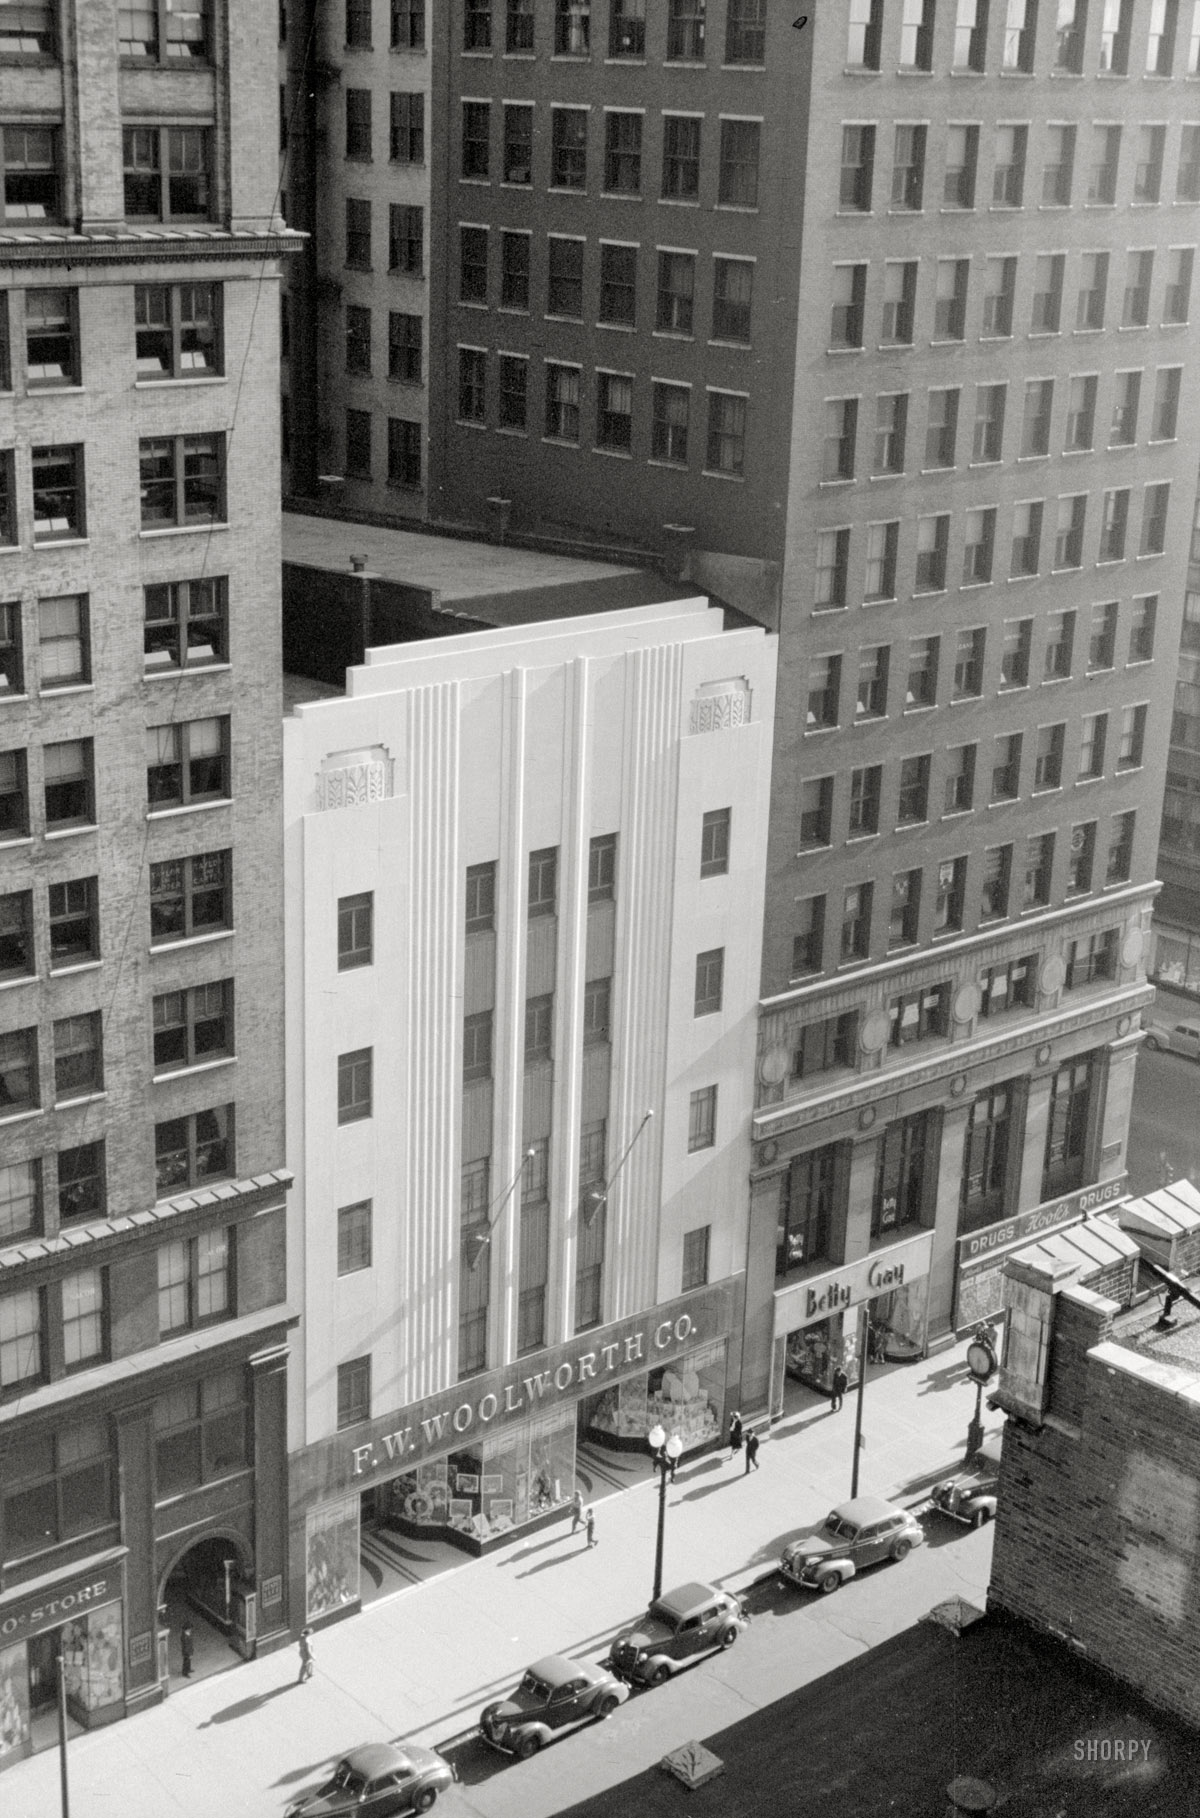 May 1940. "Woolworth Company, Indianapolis, Indiana." 35mm nitrate negative by John Vachon for the Farm Security Administration. View full size.